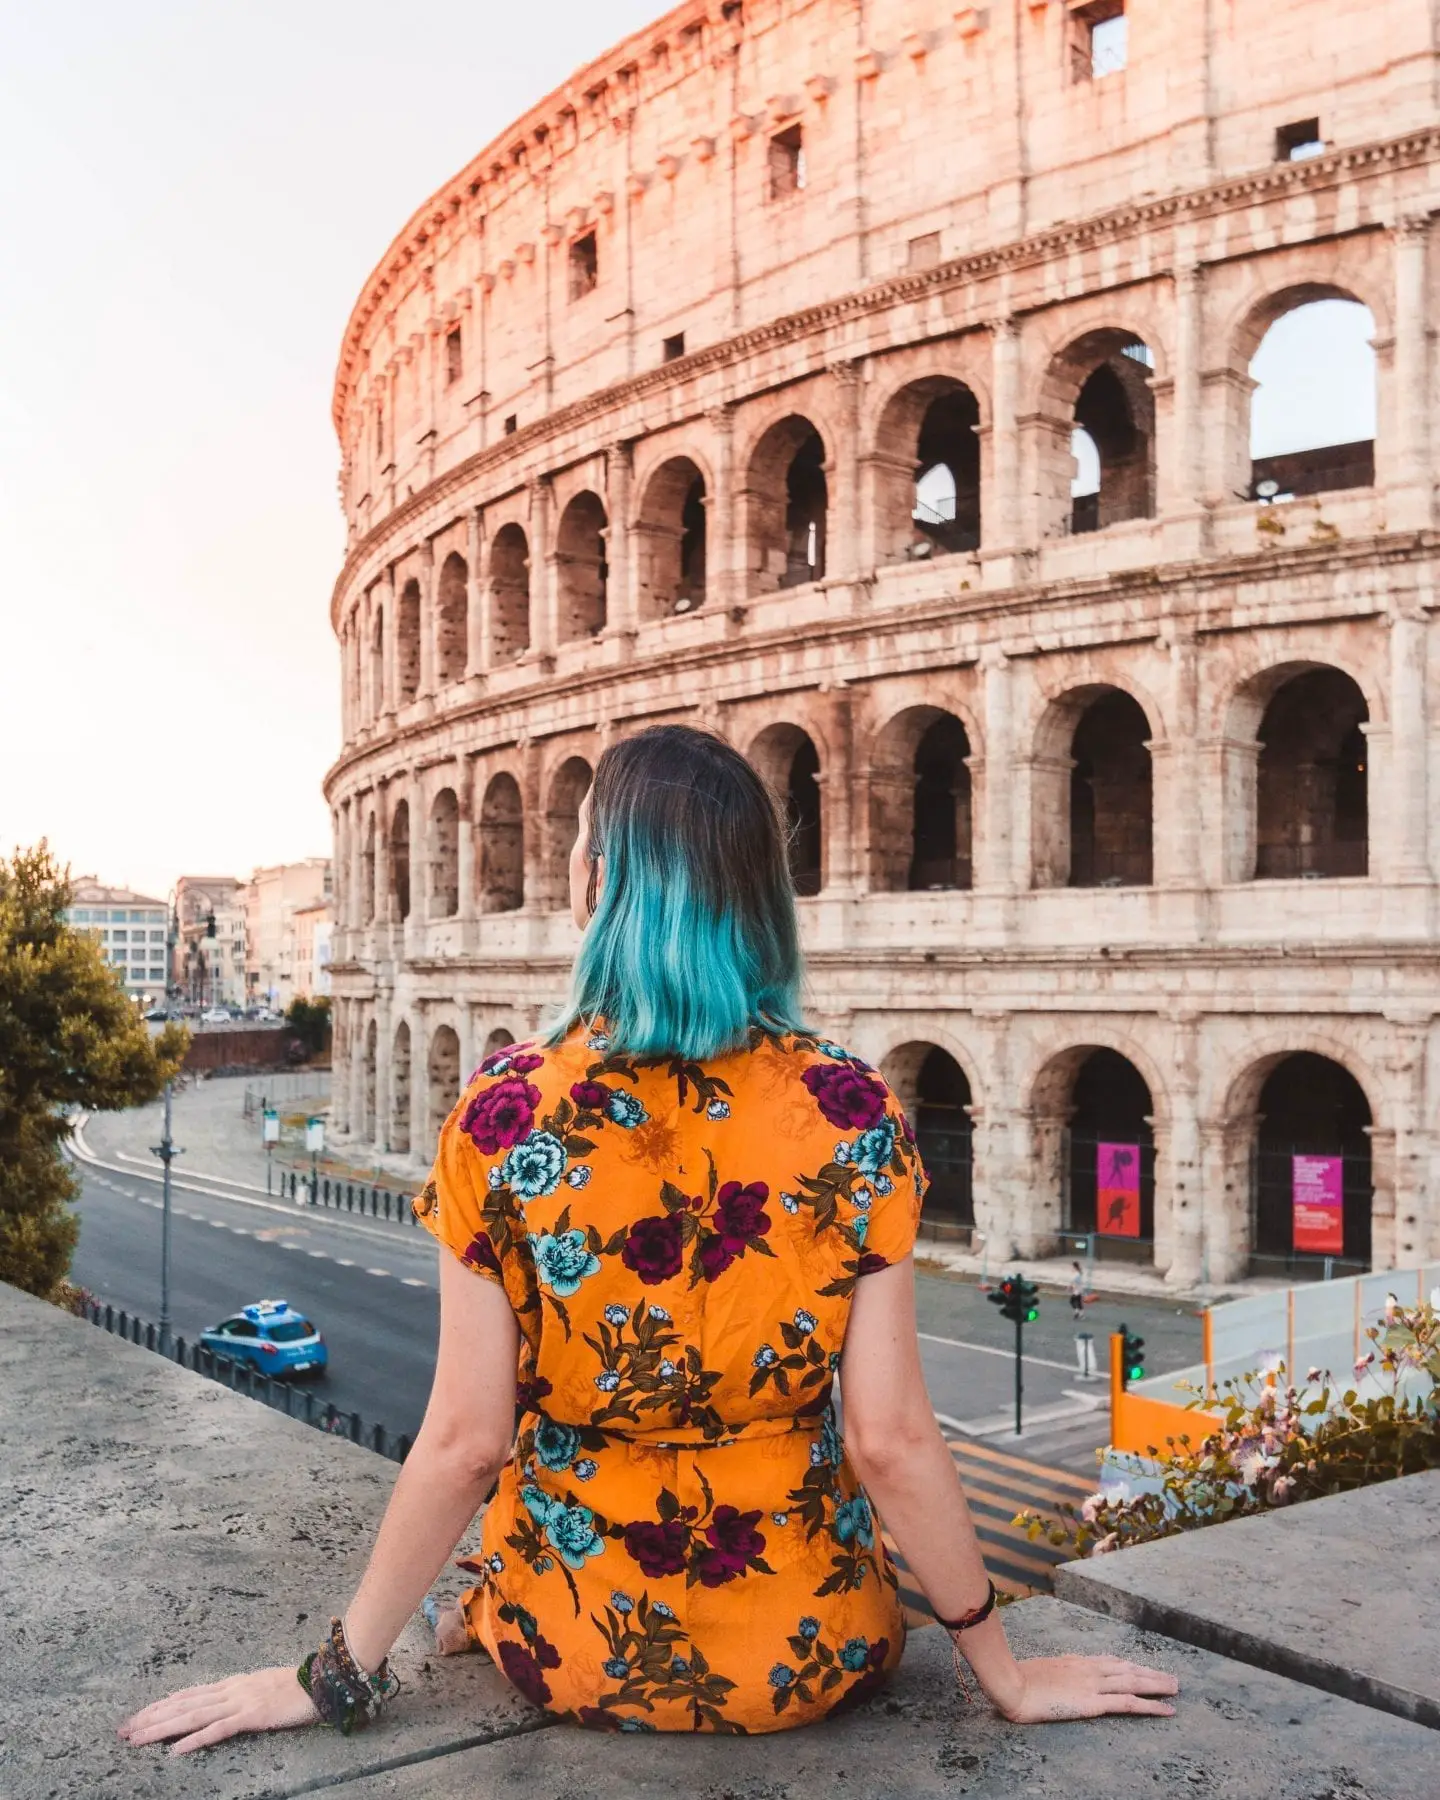 How To Travel Rome on a Budget as a South African | Wanderlust Movement | #rome #italy #budgettravel #traveltips #backpacking